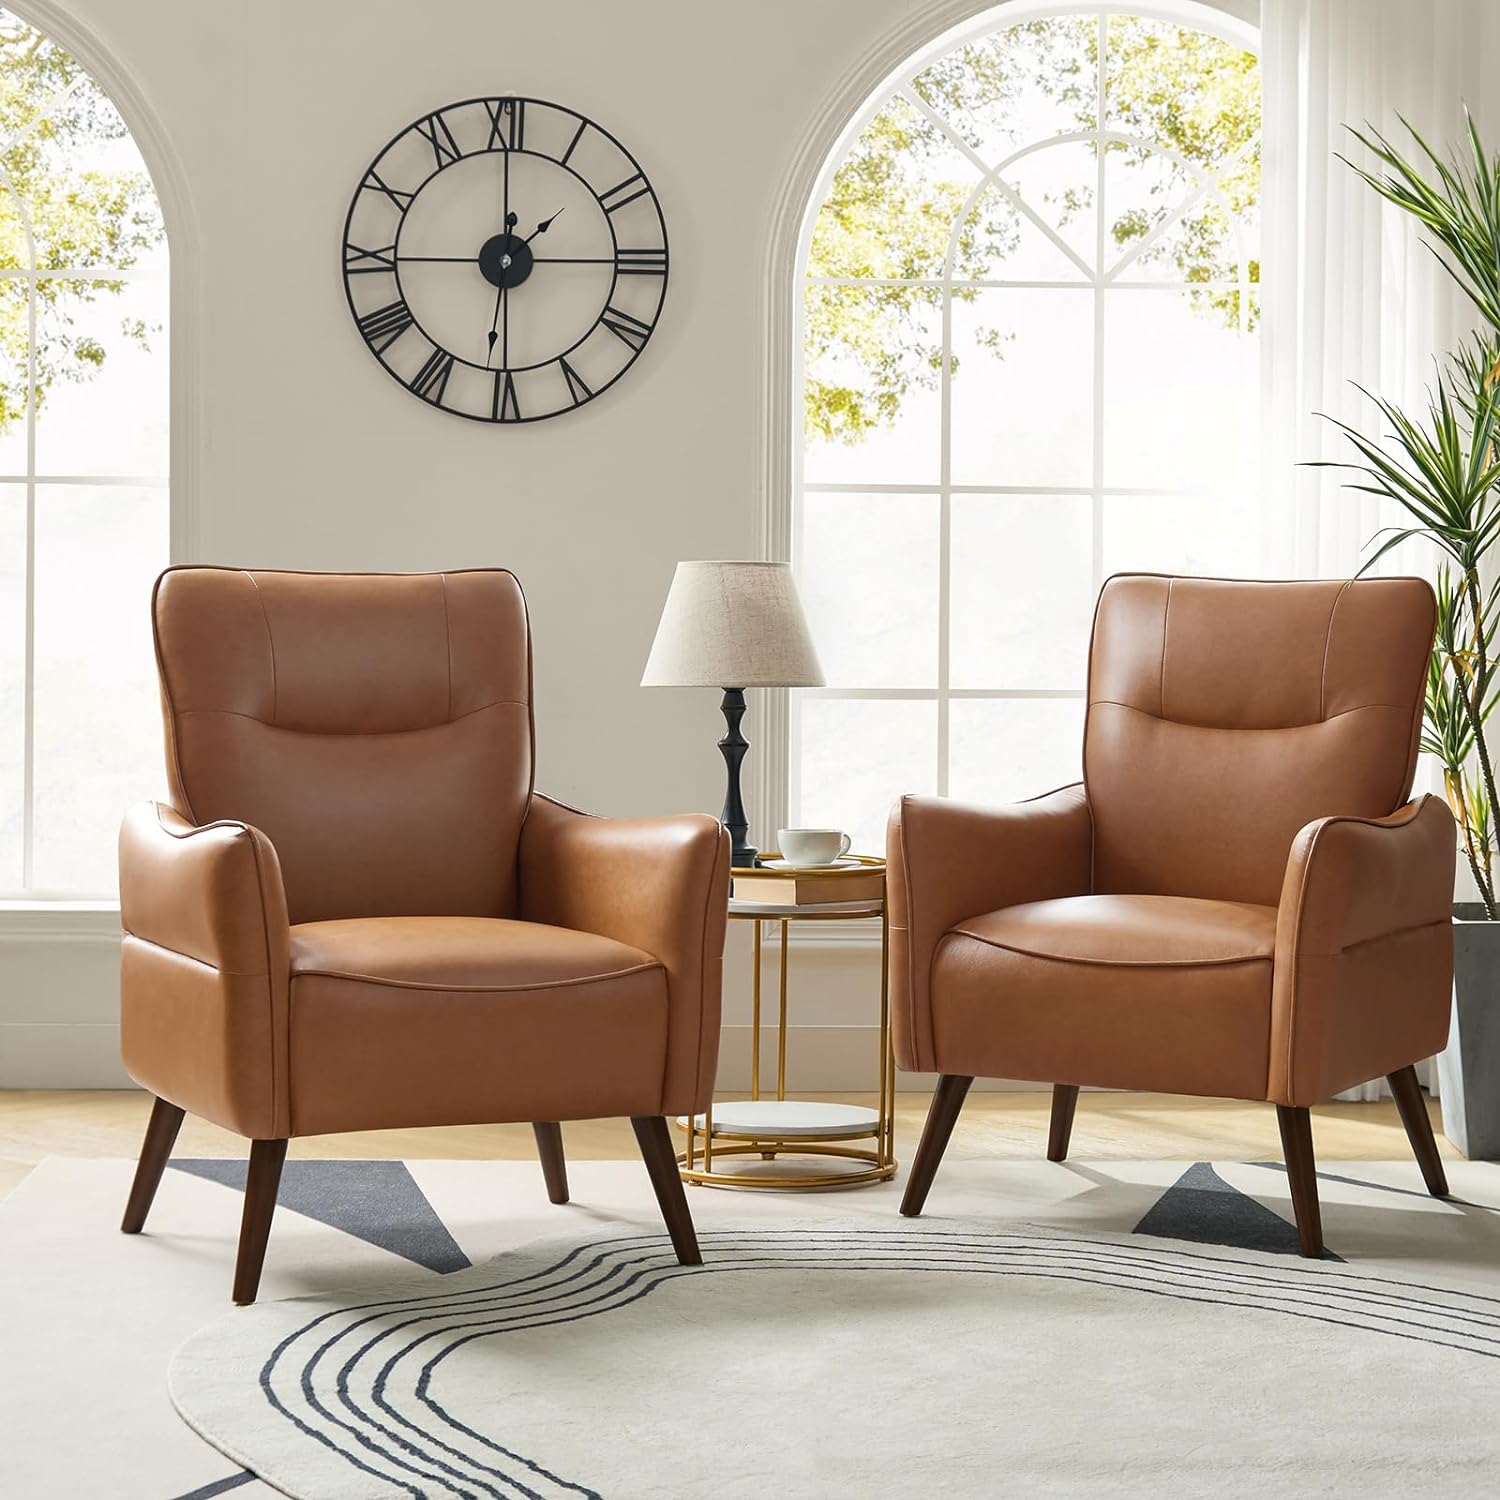 HULALA HOME Modern Faux Leather Armchairs Set of 2 with Tapered Wooden Legs, Comfy Upholstered Accent Chairs for Bedroom Living Room Office, Camel